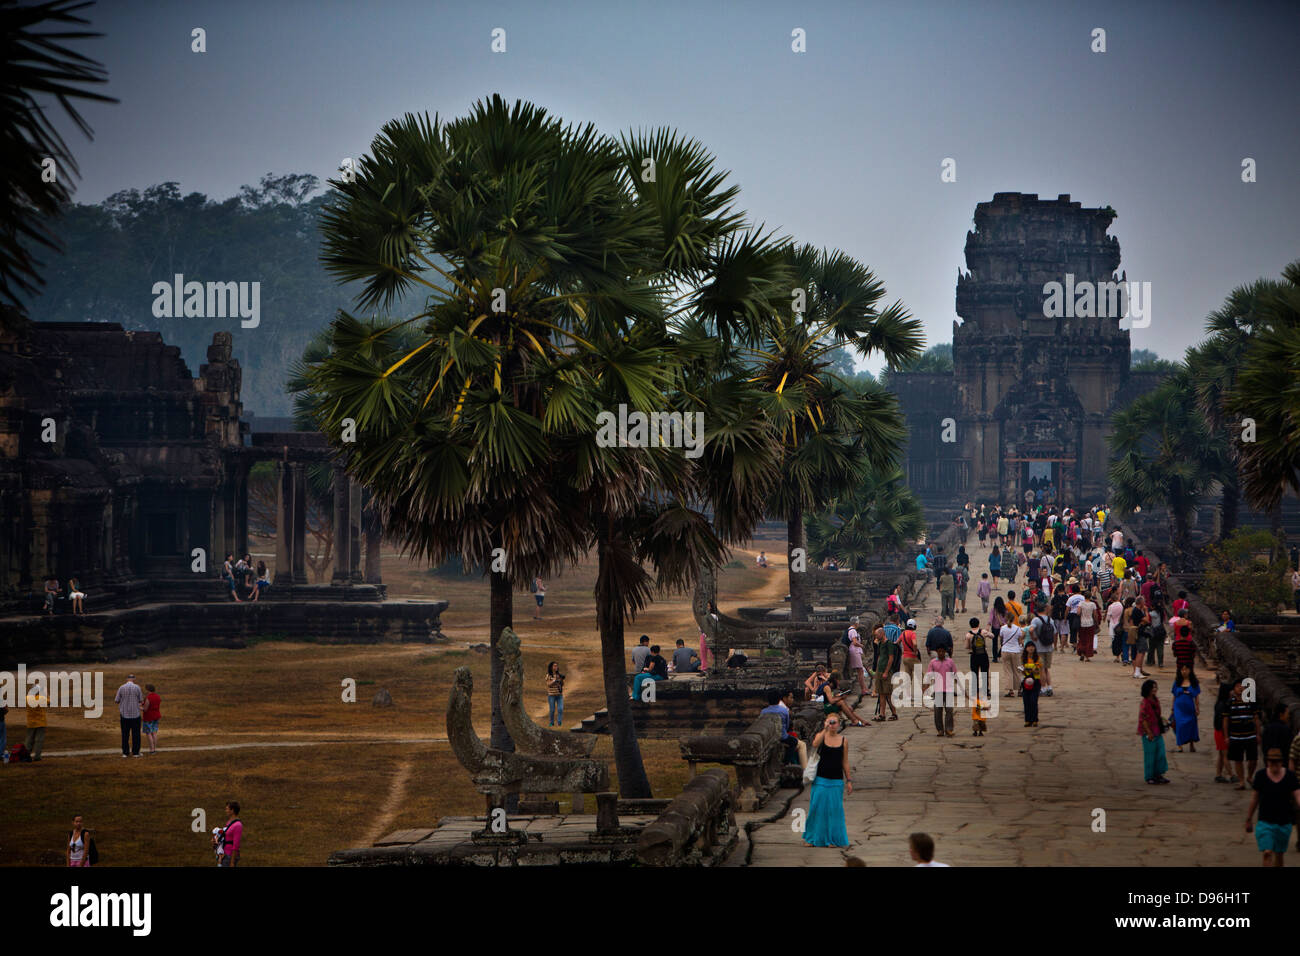 Tourists visiting Angkor Wat in the early morning, walking round the temple, Cambodia, Asia Stock Photo